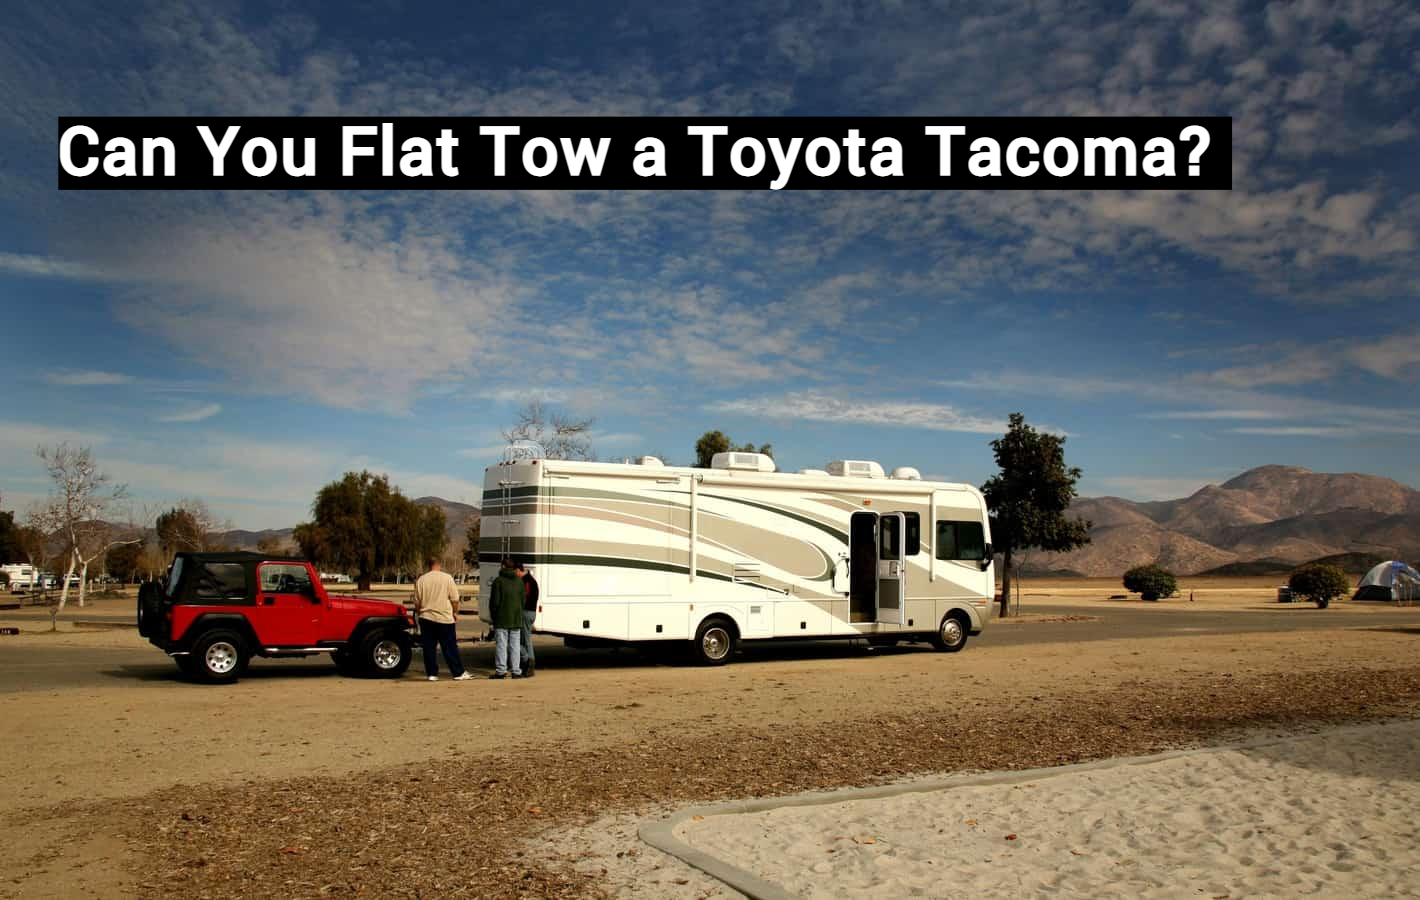 Can You Flat Tow a Toyota Tacoma?